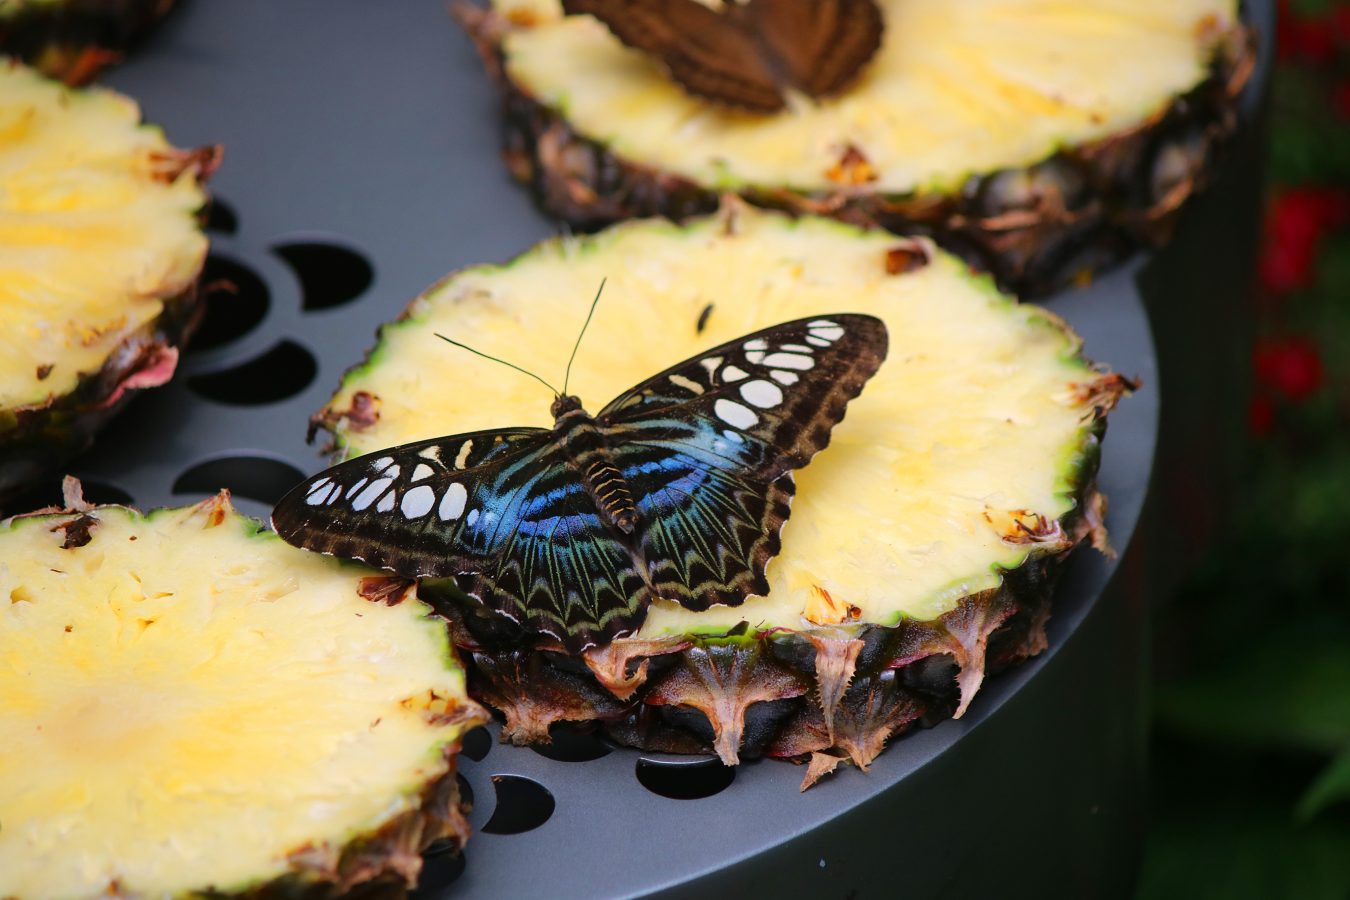 Butterfly feeds from a pineapple slice in the Butterfly Garden in Changi Airport, Singapore.